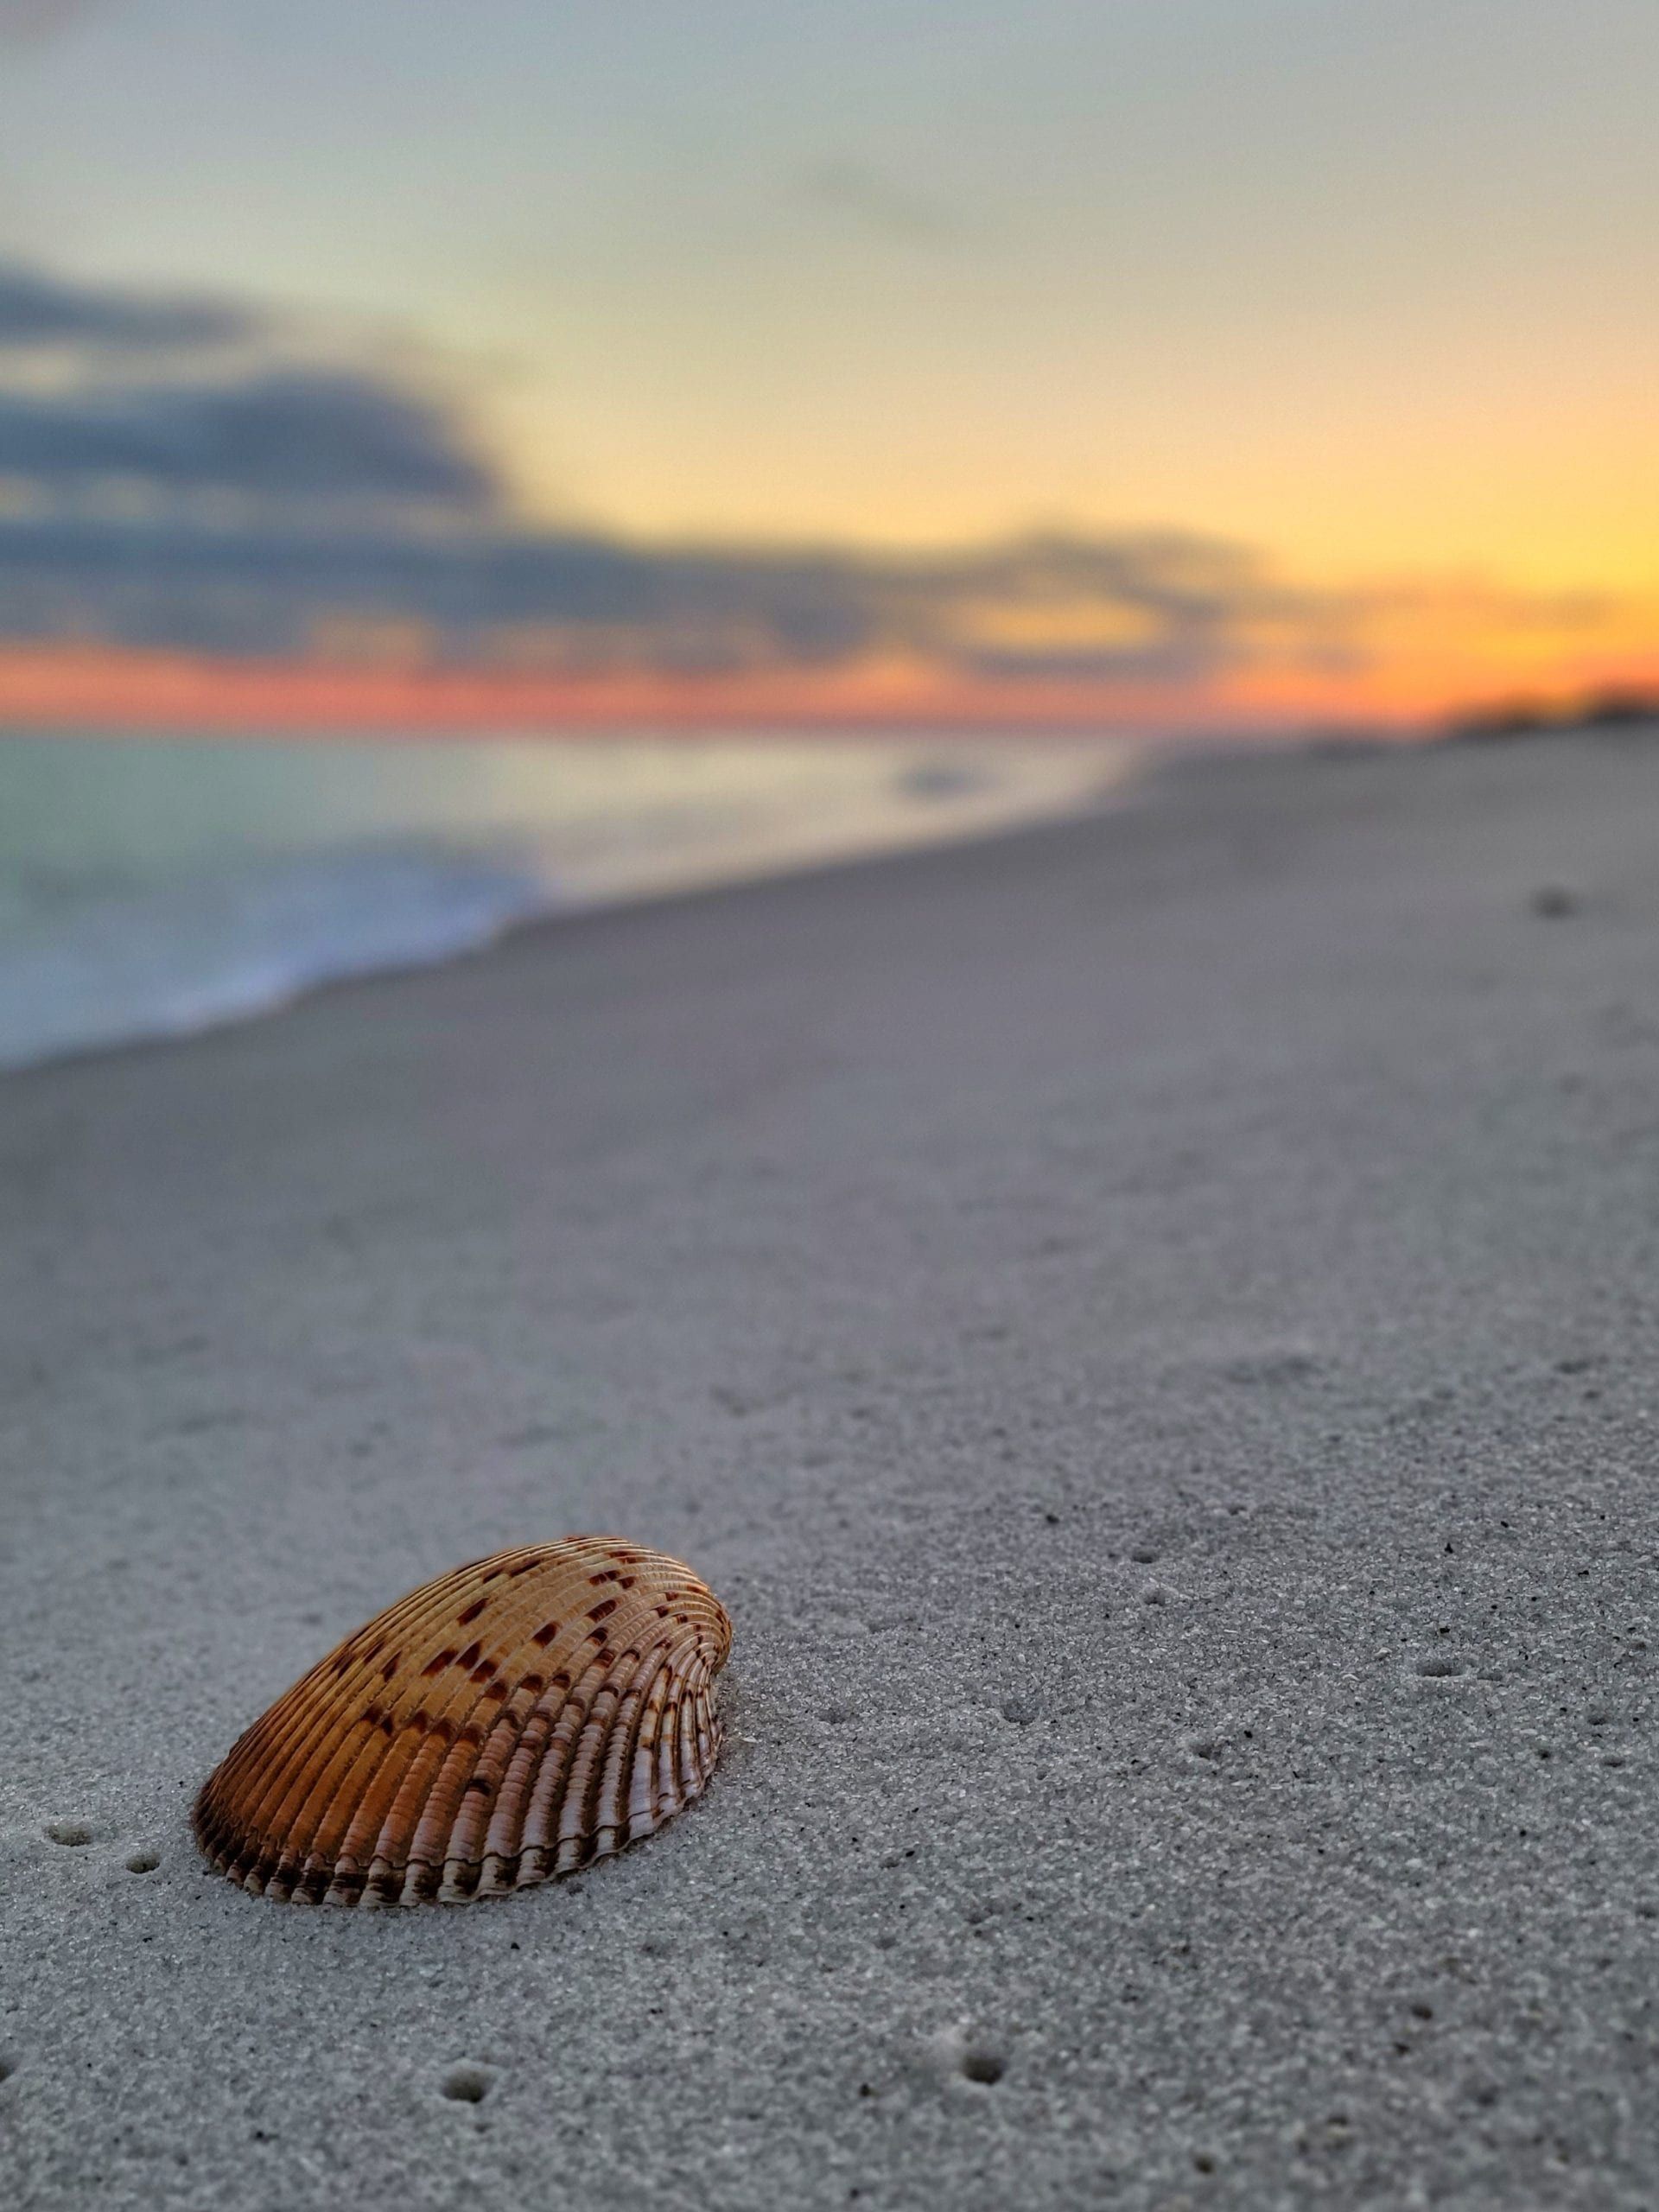 Focus on the positive.
Today's Photo of the Day was taken by Liz Fisher who found this cockle shell on a sunset walk on Navarre Beach last weekend. Email your Photo of the Day submissions to editor@navarrepress.com.